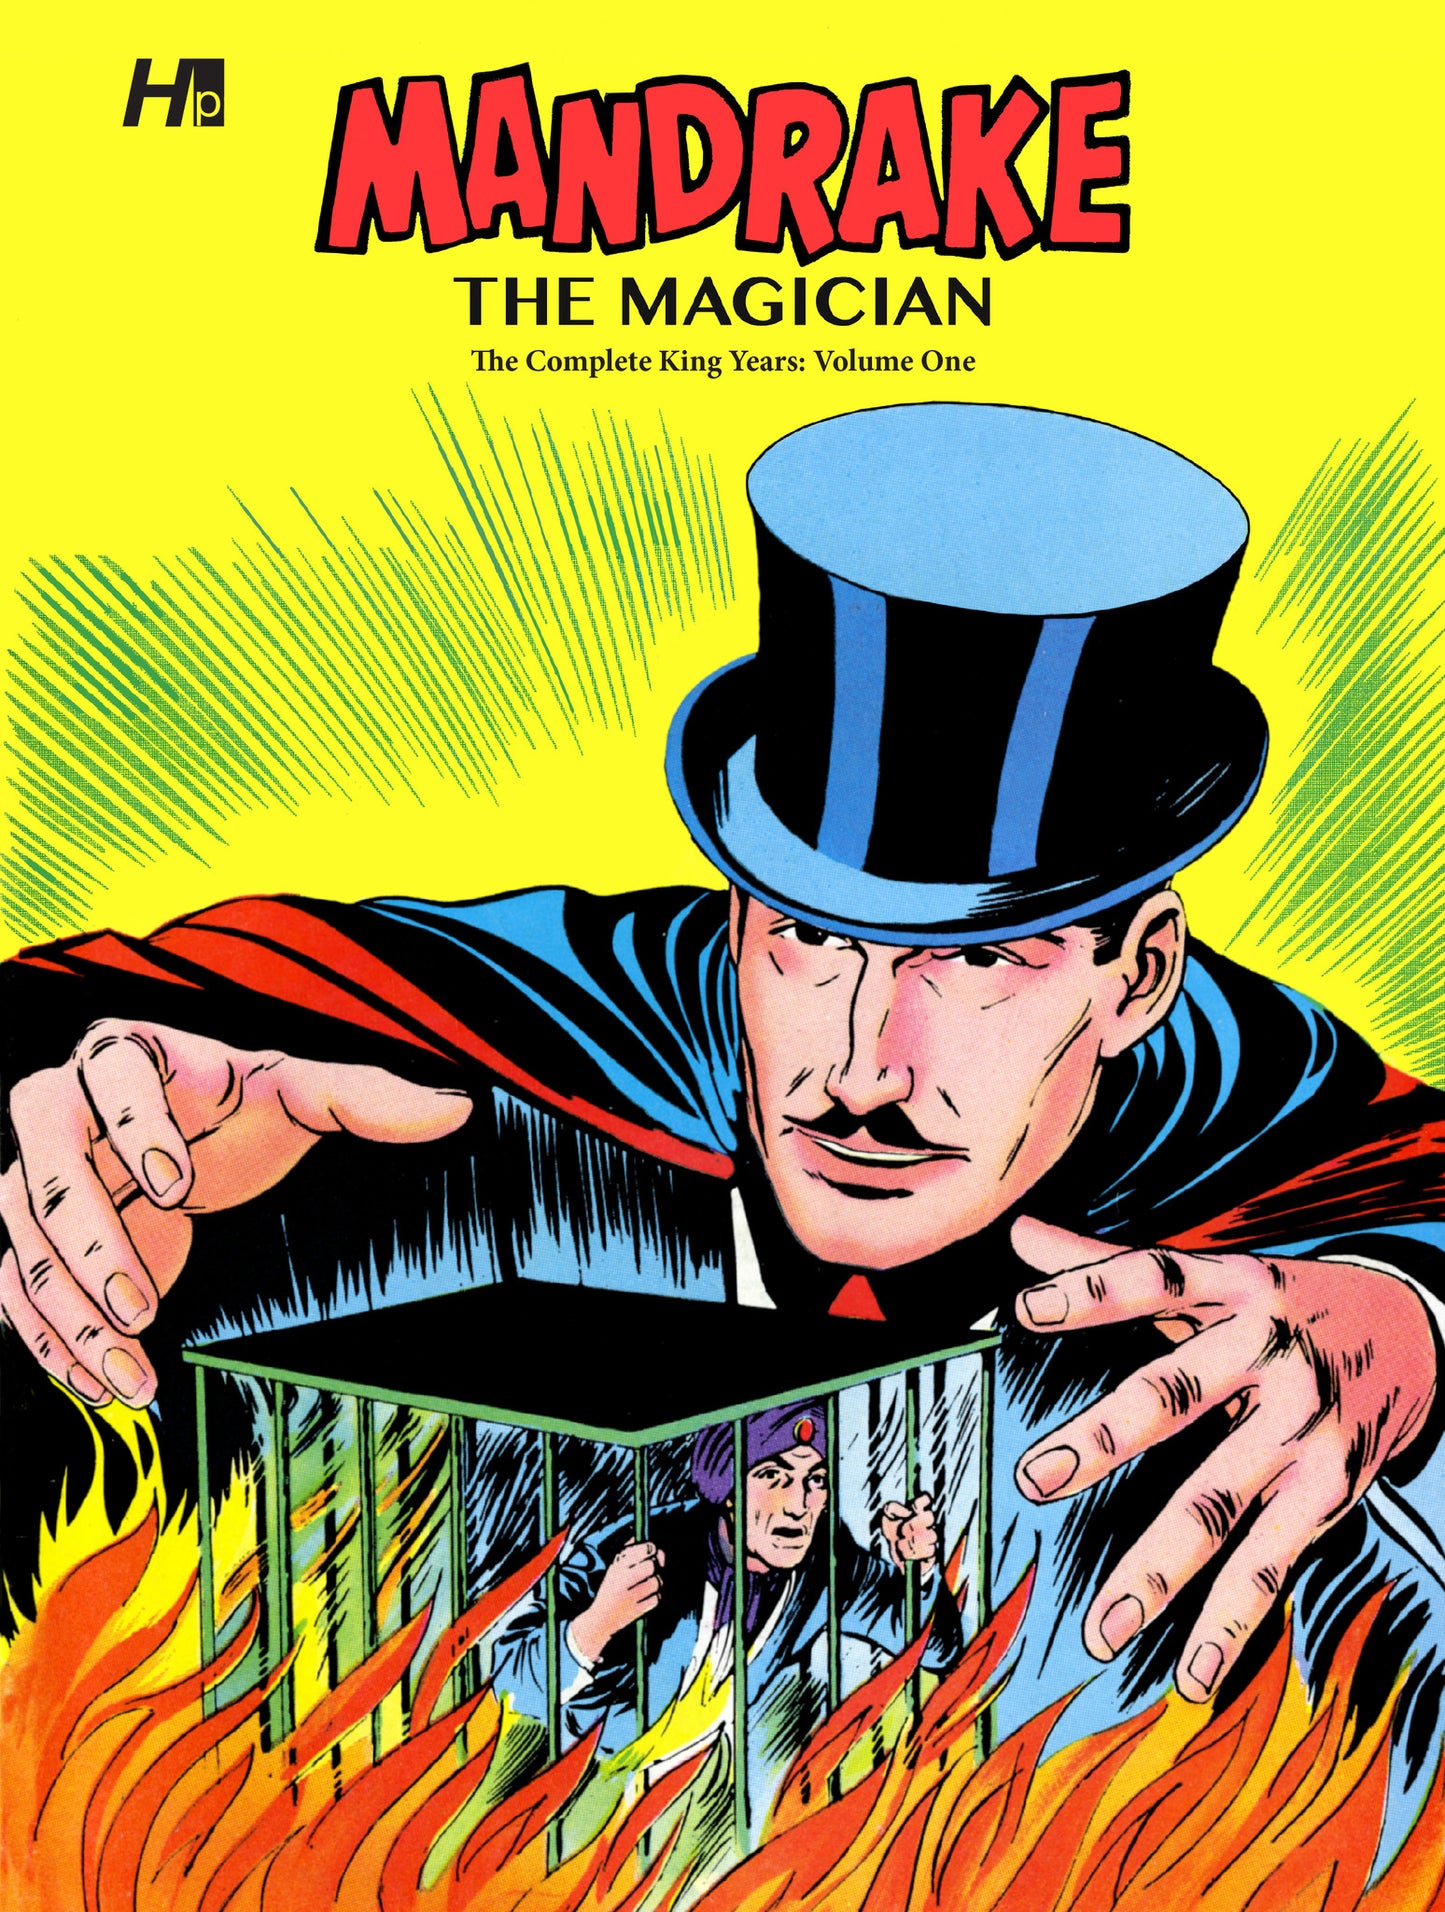 Mandrake the Magician: The Complete King Years | Vol. 1